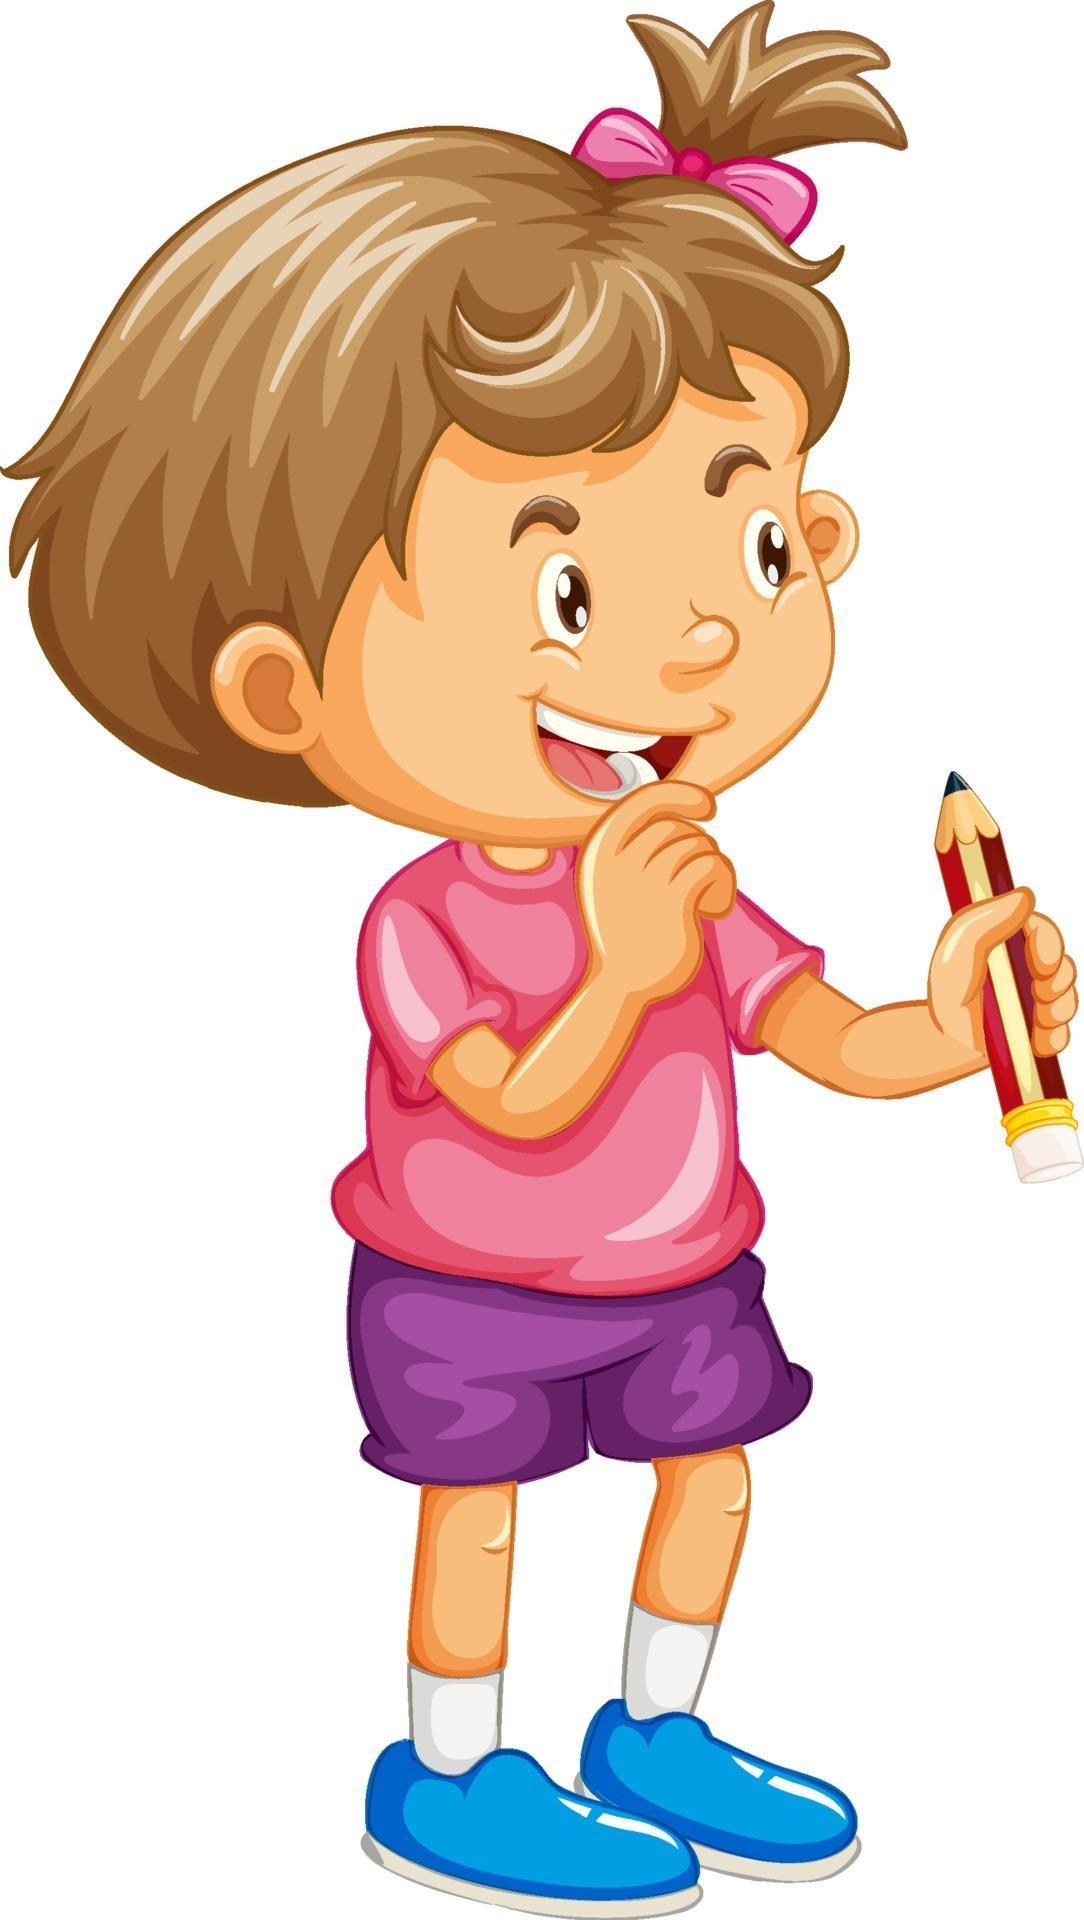 A girl holding a pencil cartoon character isolated on white background